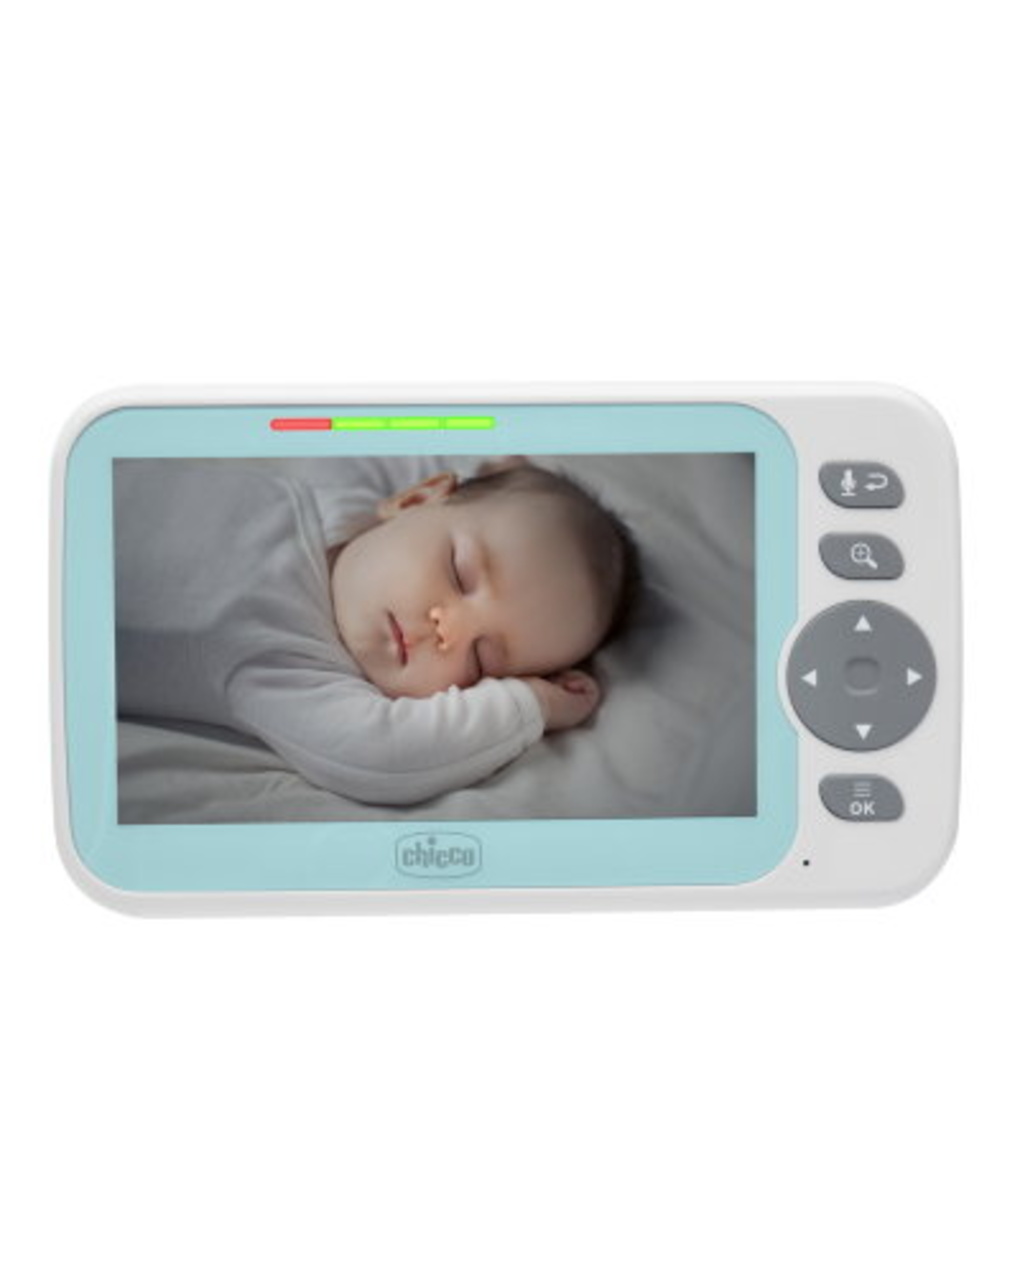 Video baby monitor evolution 5" - chicco - Chicco